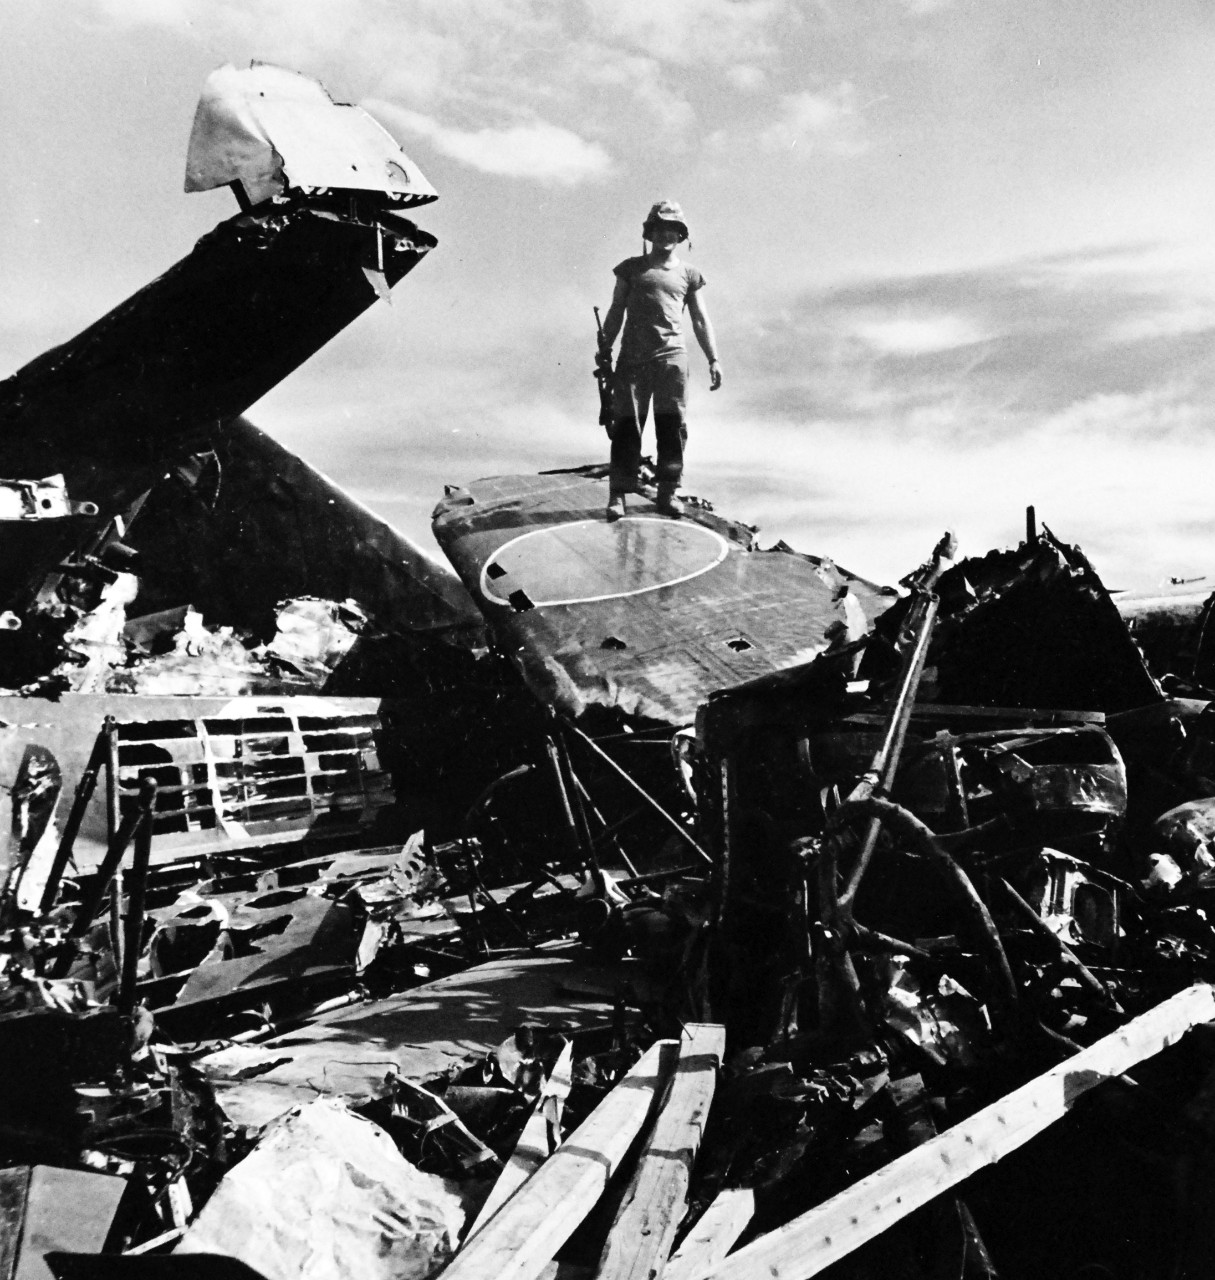 80-G-475140:  Invasion of Saipan, June-July 1944.  U.S. Marine stands on battered wreckage of Japanese bomber on Saipan.   Photographed by Lieutenant Paul Dorsey, July 1944, TR-10219.      Official U.S. Navy photograph, now in the collections of the National Archives.   (2017/03/15).